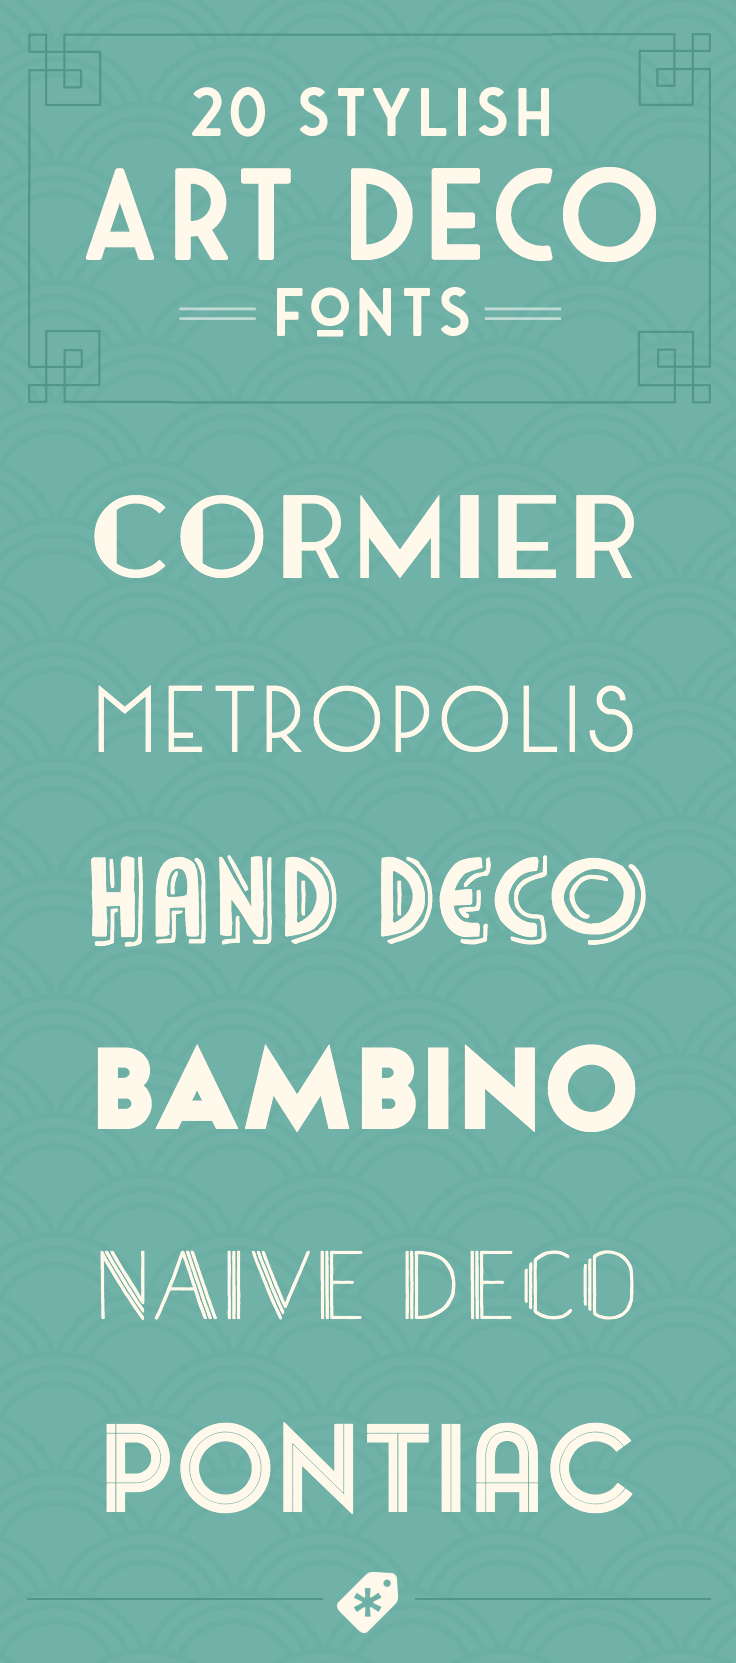 Art Deco Fonts To Create Retro Logos Posters And Websites Creative Market Blog